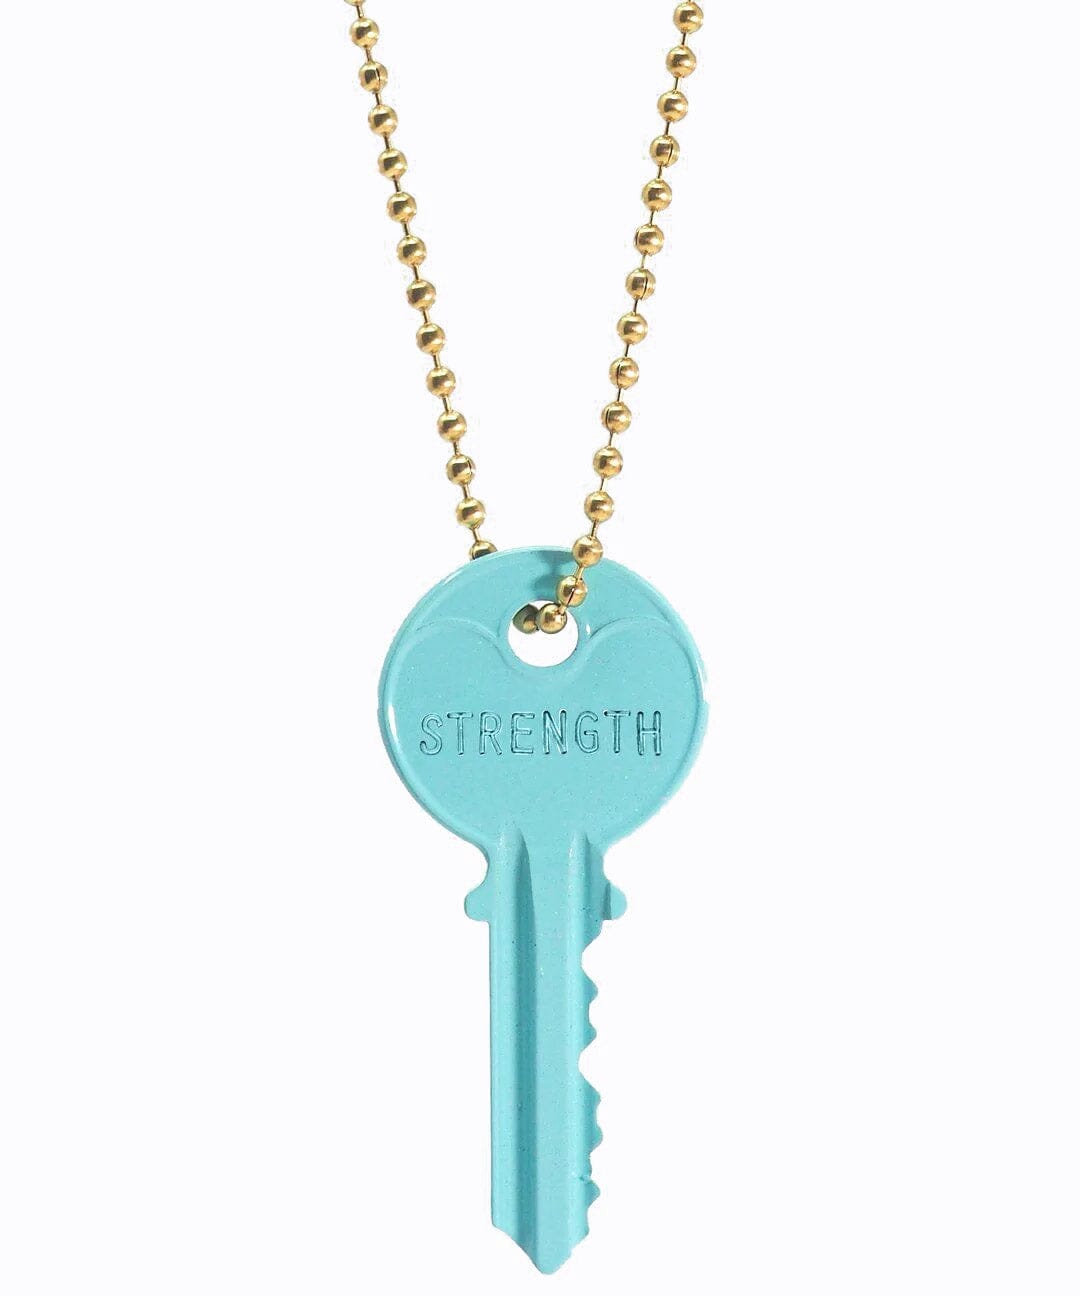 N - Sky Blue Classic Ball Chain Key Necklace Necklaces The Giving Keys 